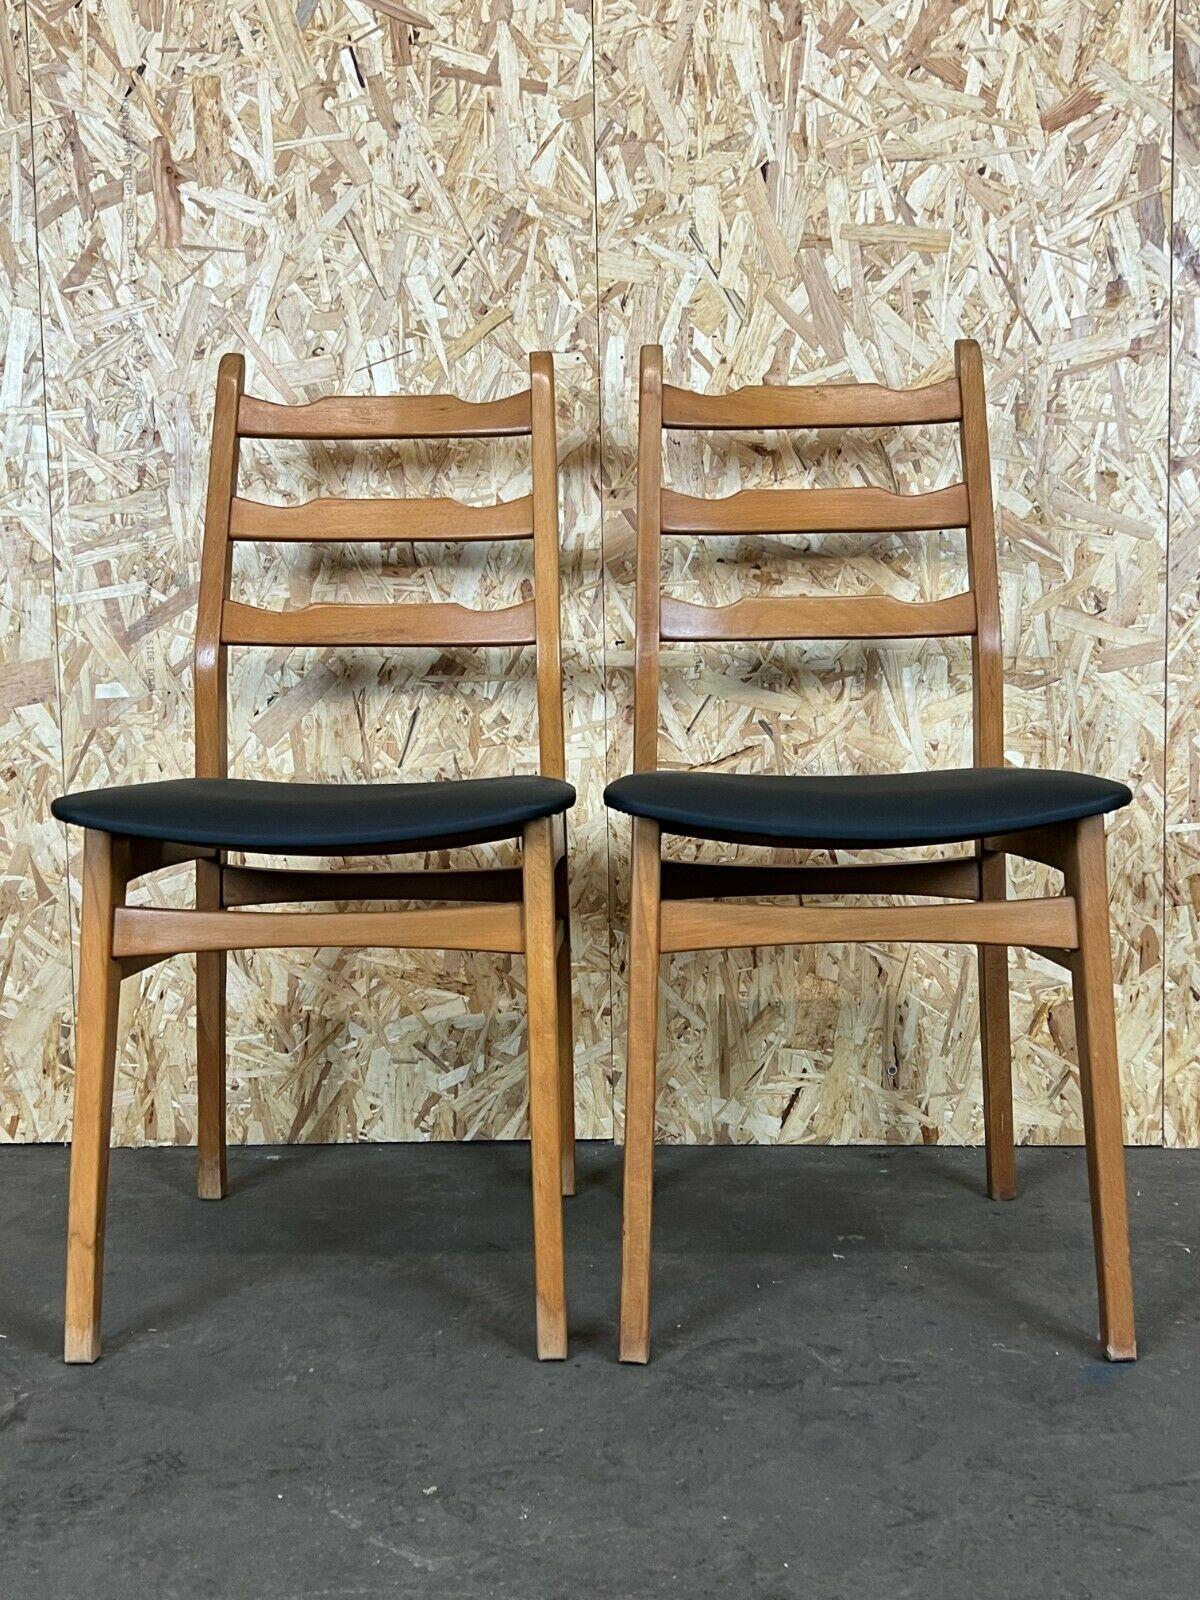 2x 70s chairs dining chair Danish upholstered chair mid century design

Object: 2x chair

Manufacturer:

Condition: good

Age: around 1960-1970

Dimensions:

43cm x 53cm x 89.5cm
Seat height = 45cm

Other notes:

The pictures serve